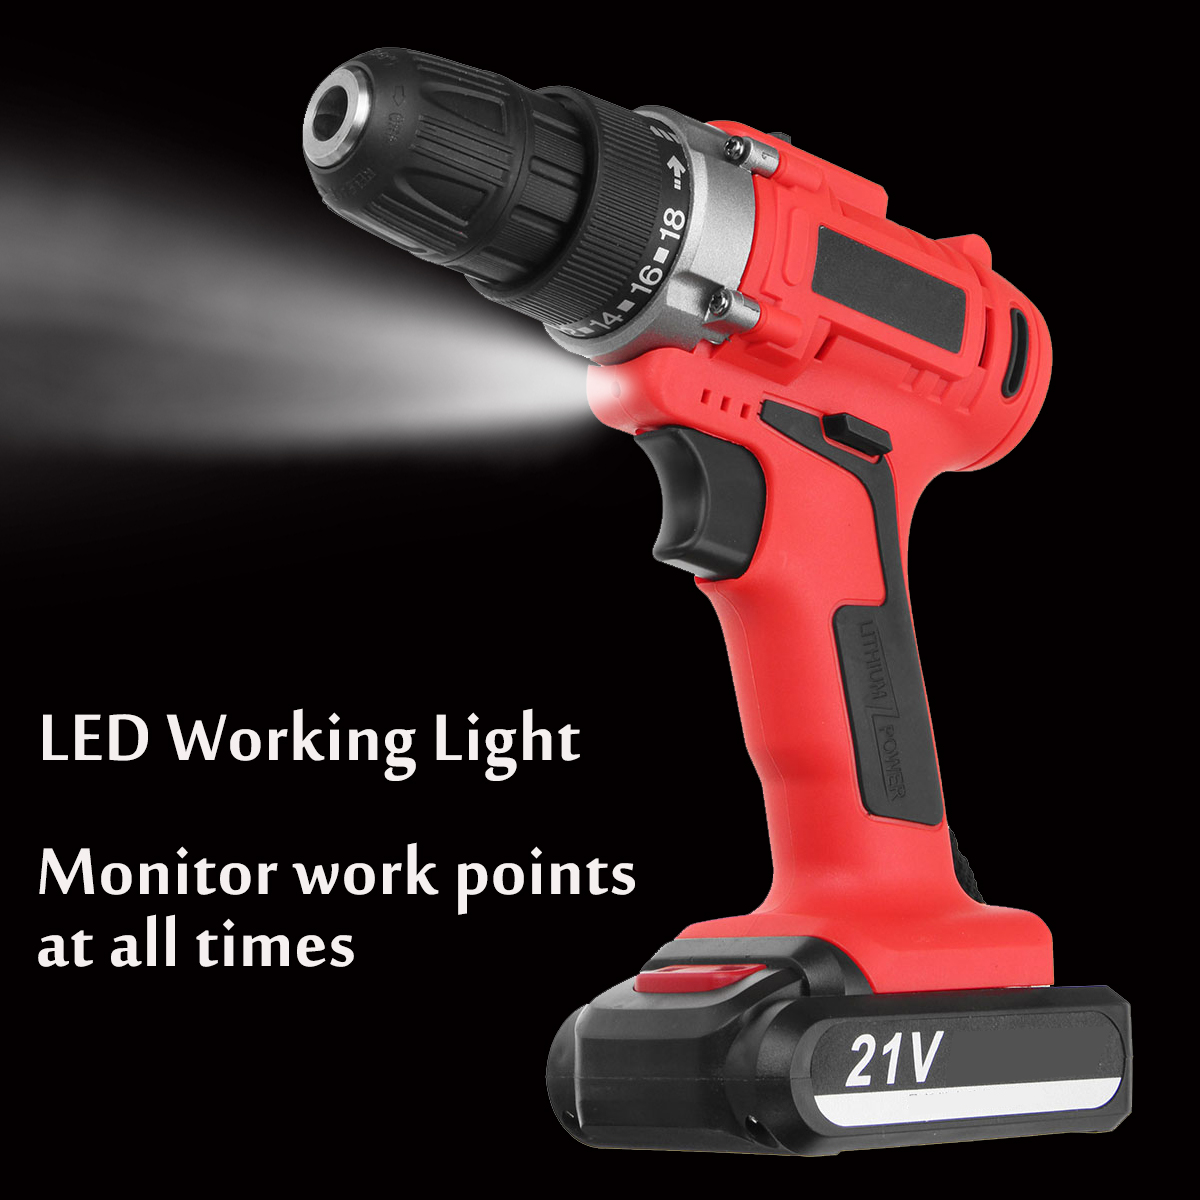 300W-21V-LED-Cordless-Electric-Drill-Screwdriver-1500mAh-Rechargeable-Li-Ion-Battery-Repair-Tools-1421882-7